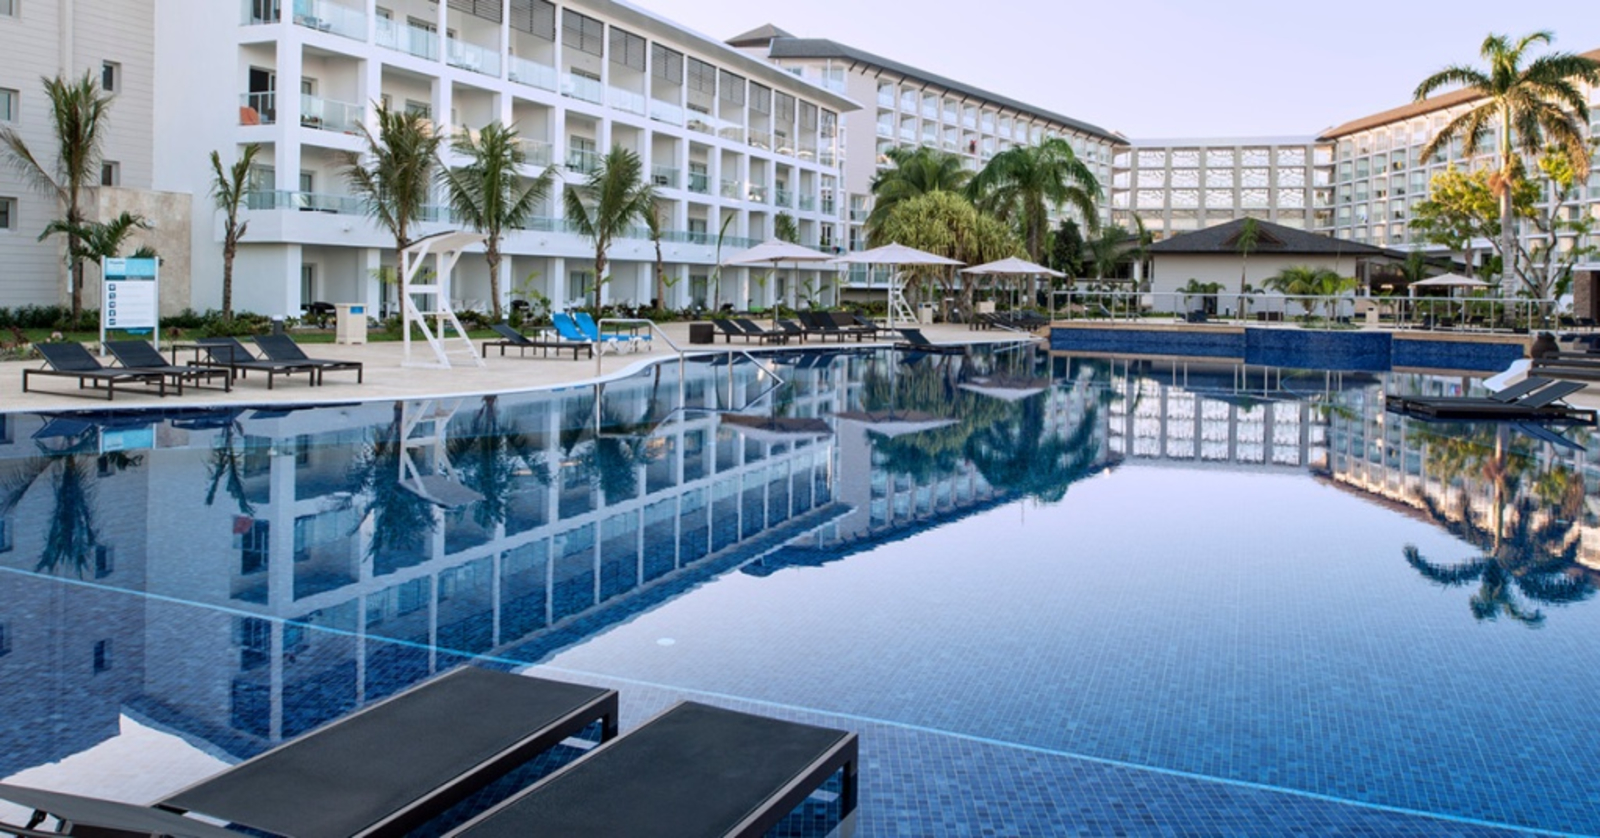 Royalton White Sands hotel in Jamaica - large white hotel with a dark blue pool